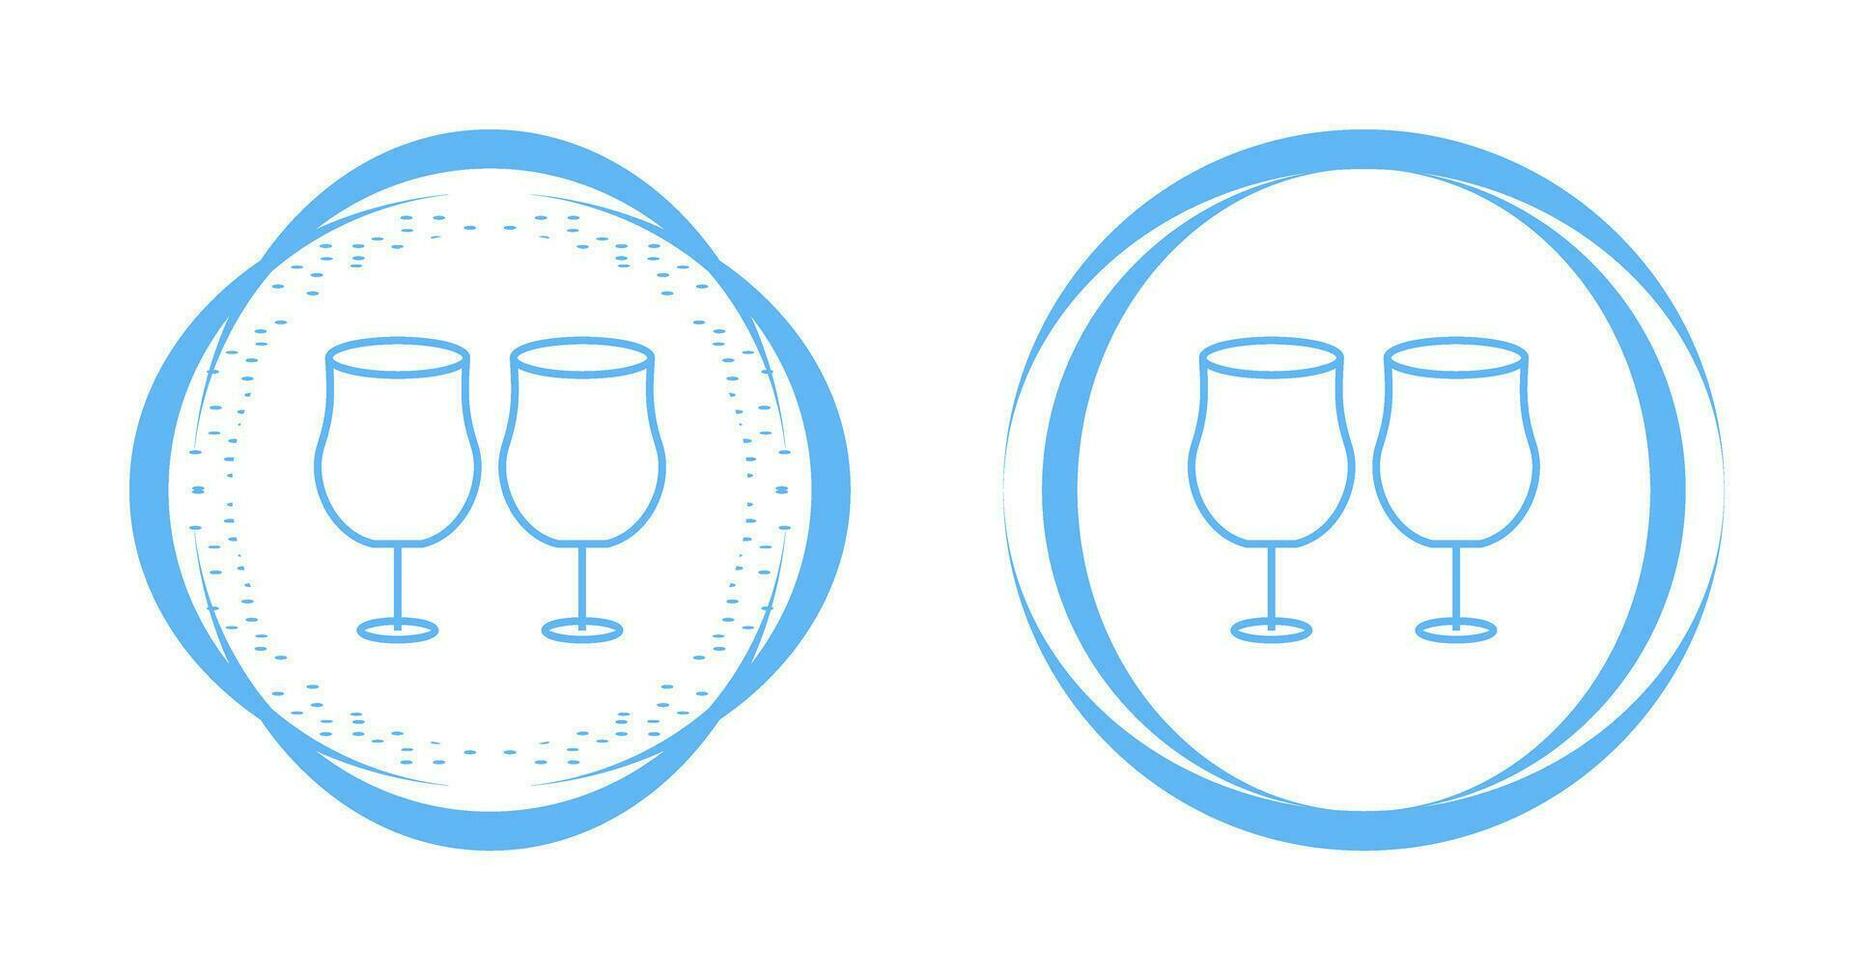 Party Glasses Vector Icon